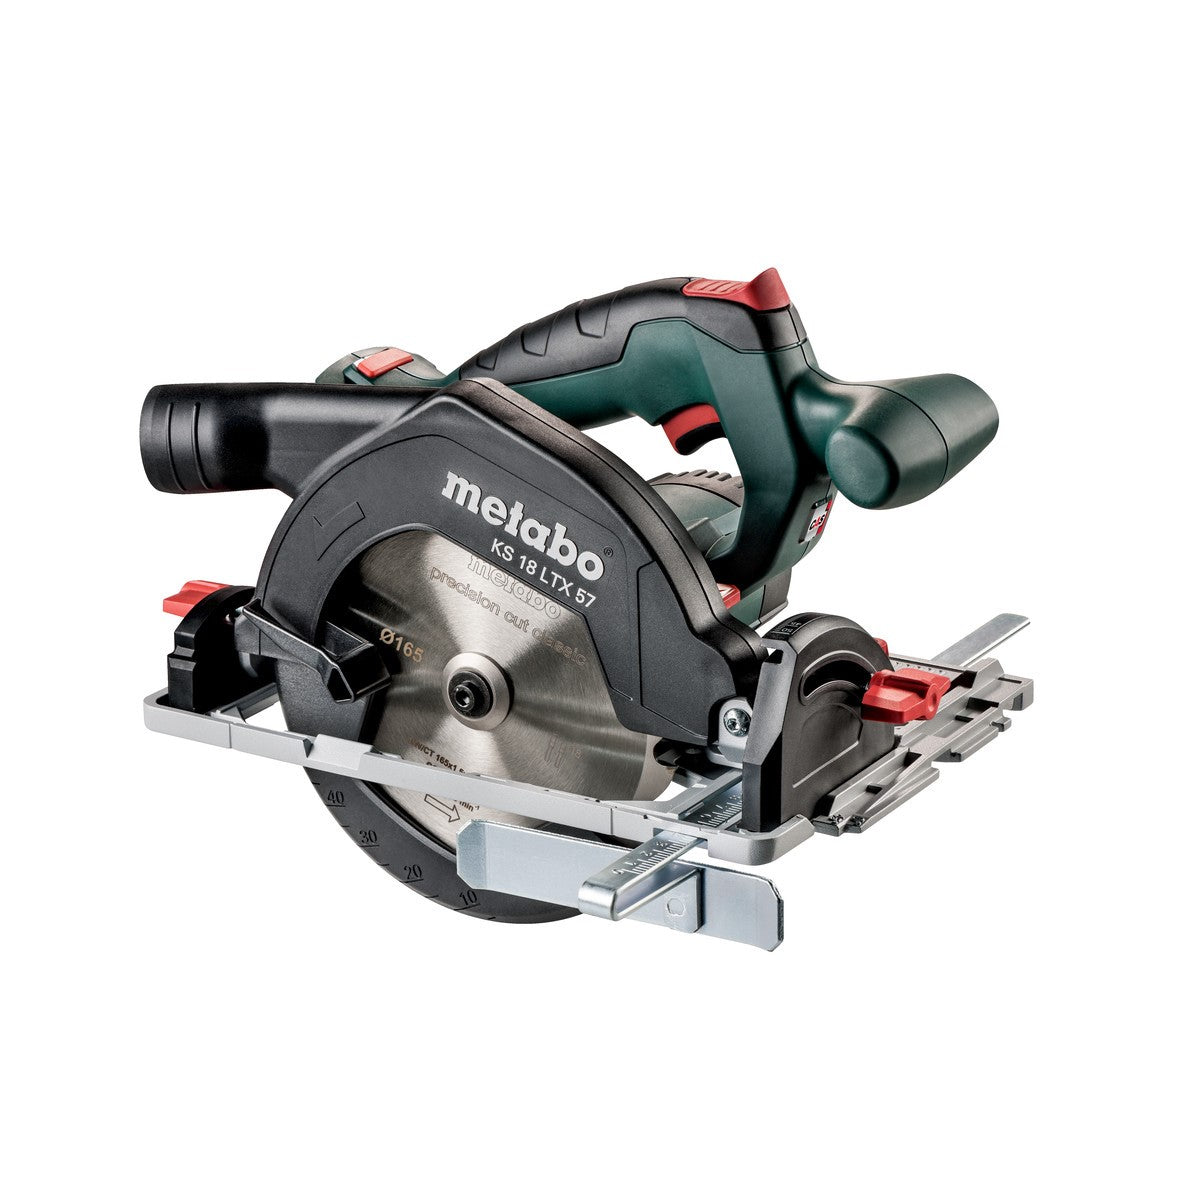 Metabo 18V Compact Reciprocating Saw Bare (602266890 18 LTX COMPACT Bare), Woodworking - 1